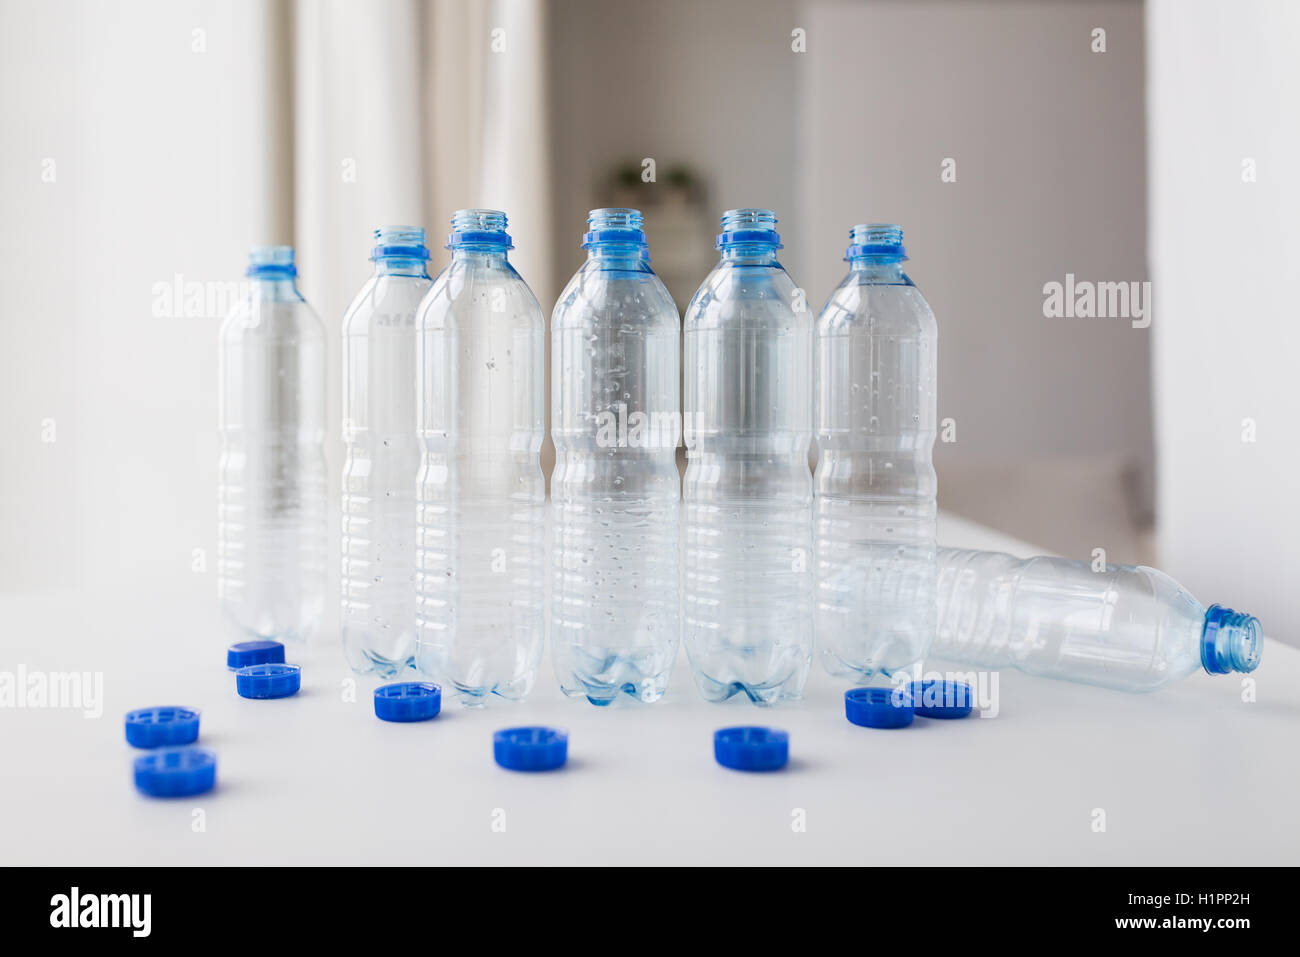 https://c8.alamy.com/comp/H1PP2H/close-up-of-empty-water-bottles-and-caps-on-table-H1PP2H.jpg